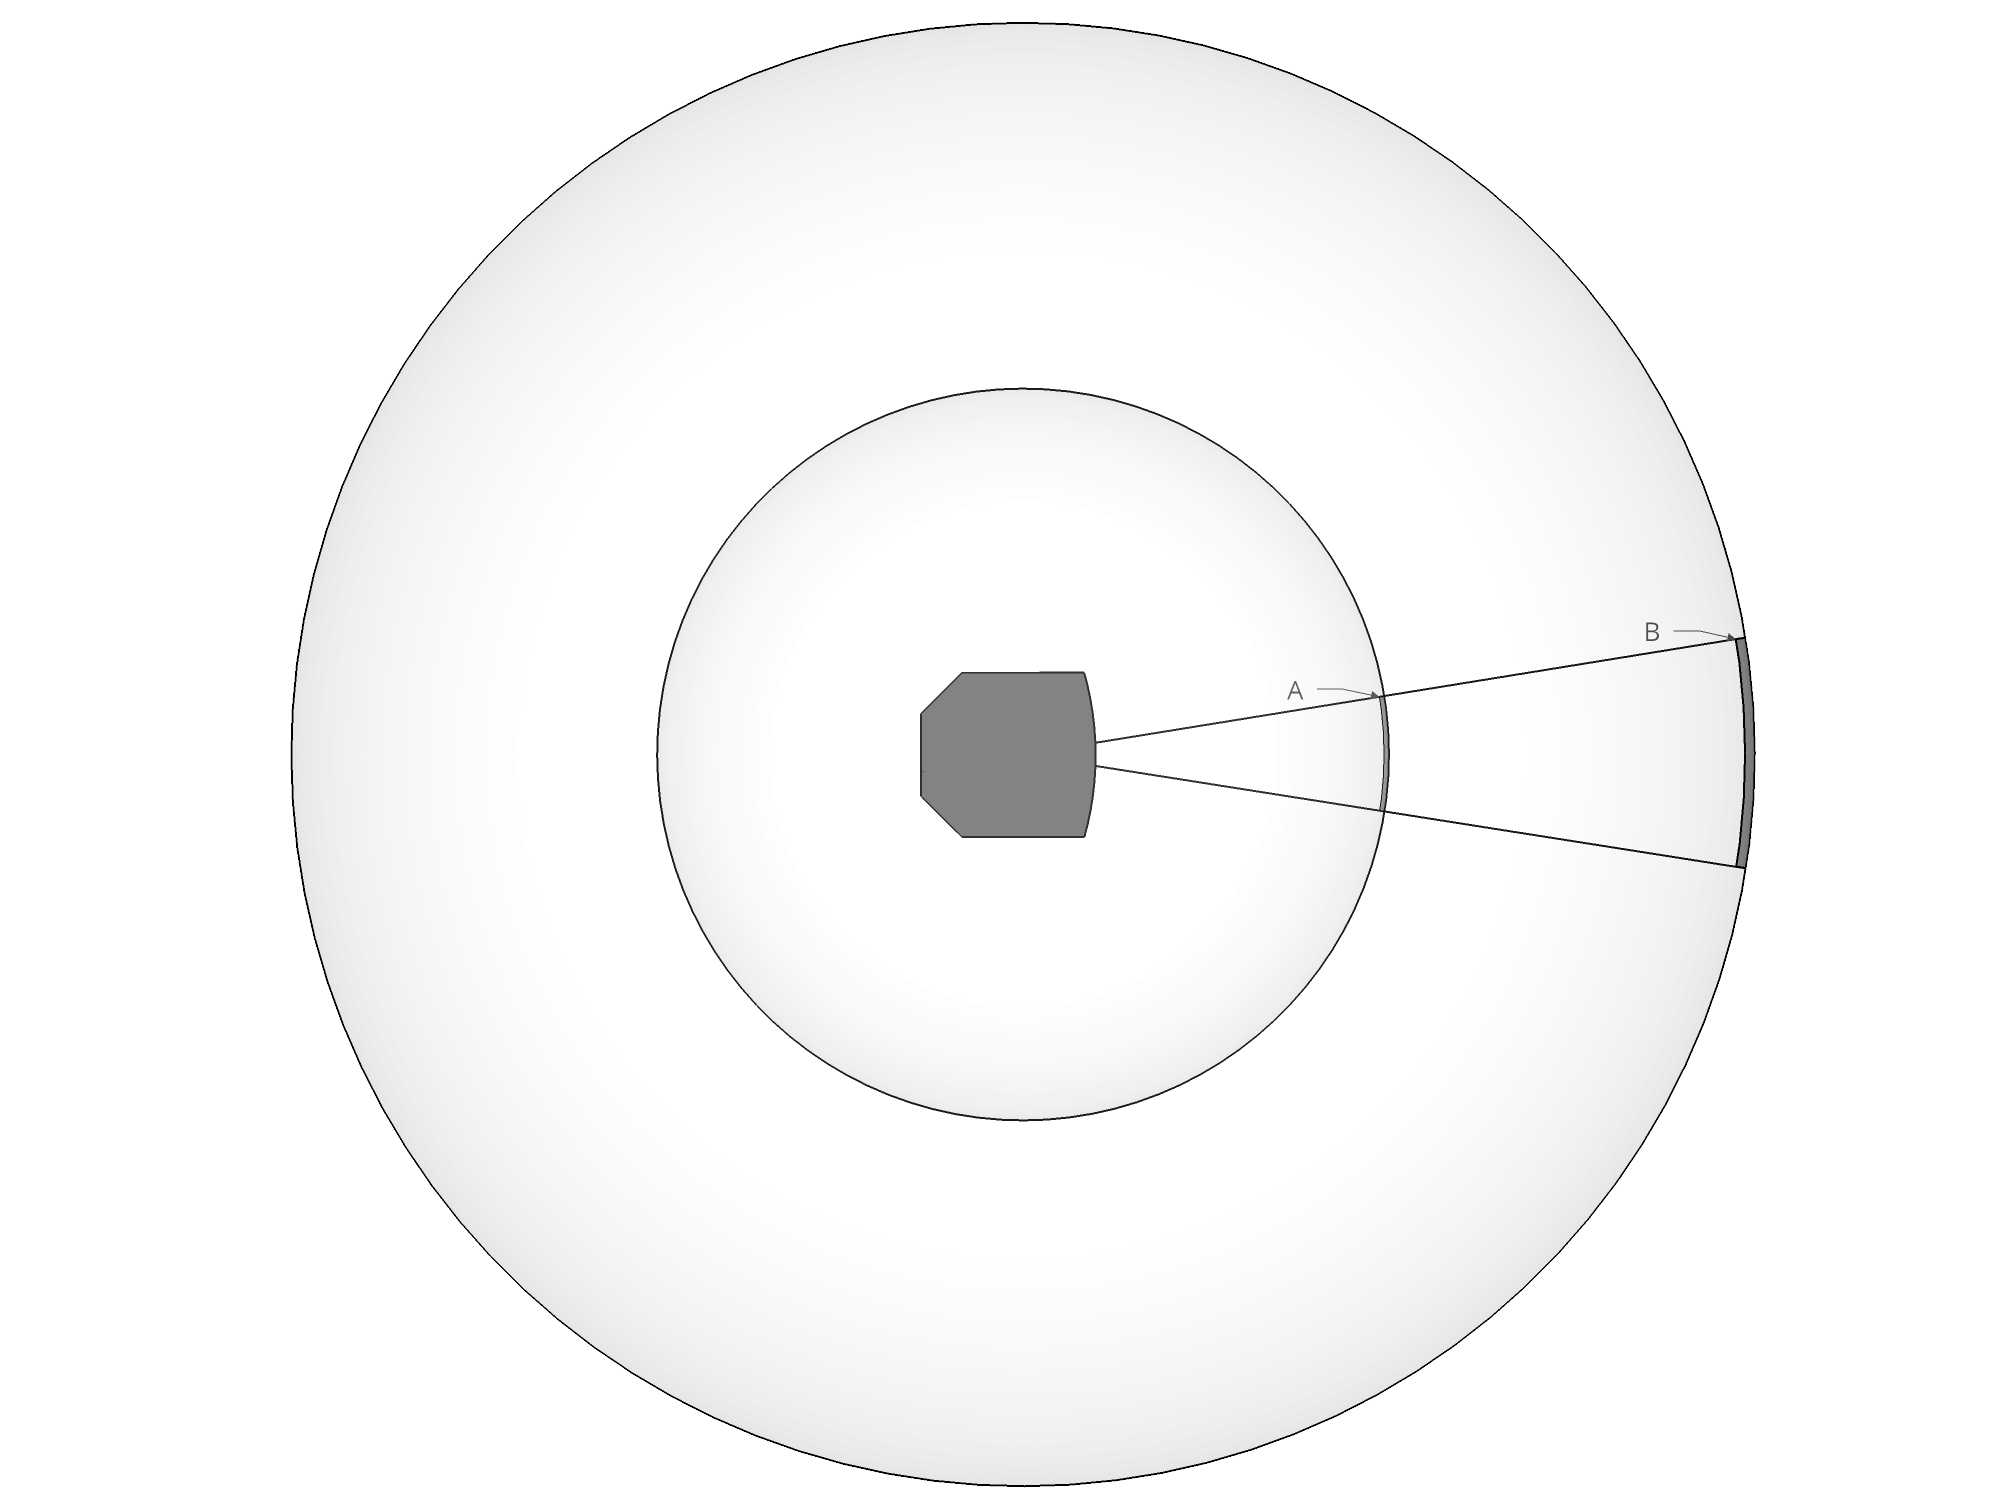 Distance over a circle